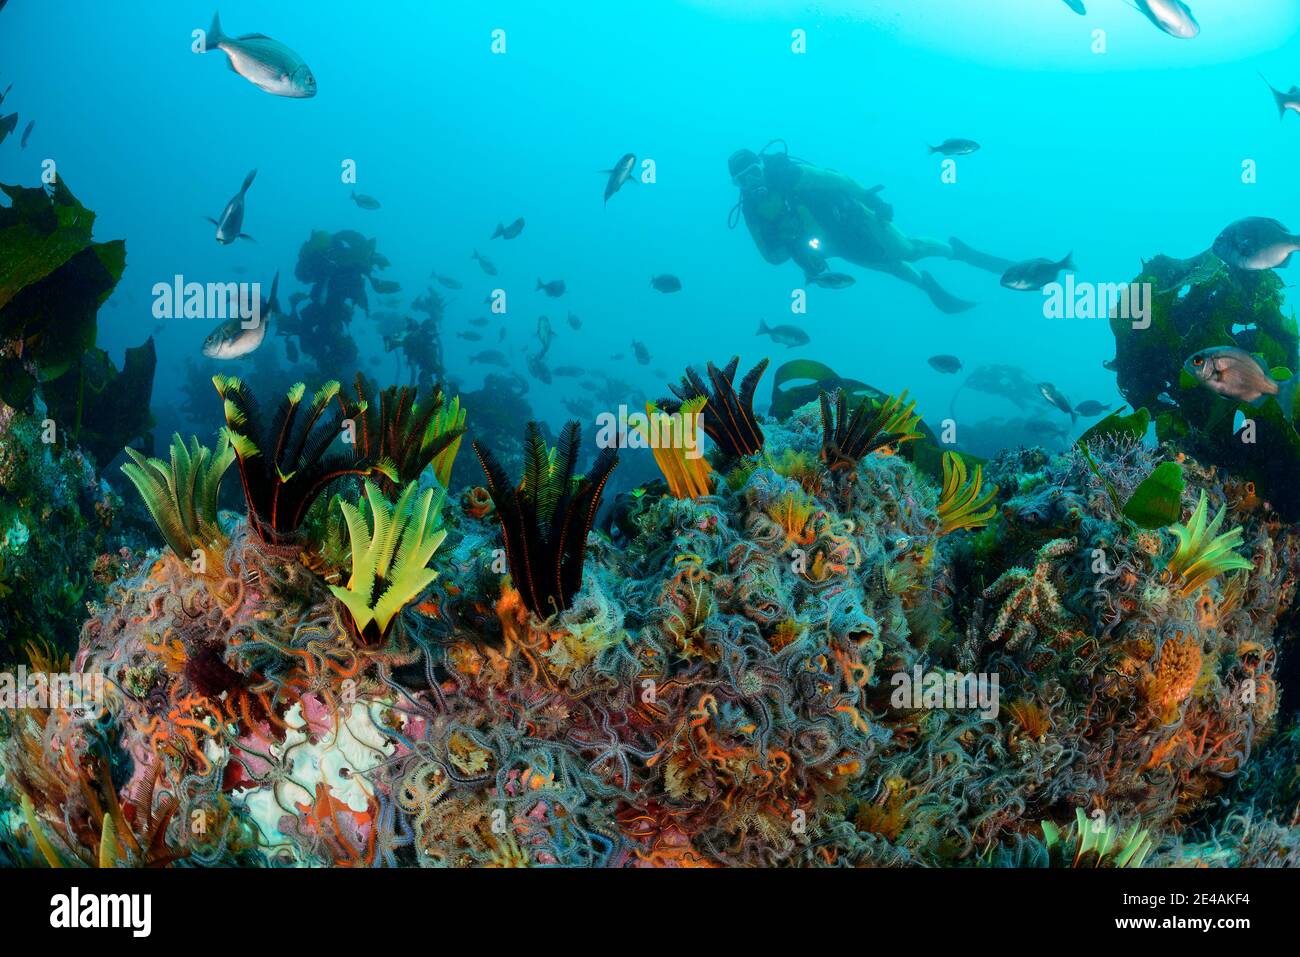 Coral reef with brittle stars, crinoidea (class) and feather stars Ophiuroidea (class) and divers, False Bay, Simons Town, South Africa, Indian Ocean Stock Photo